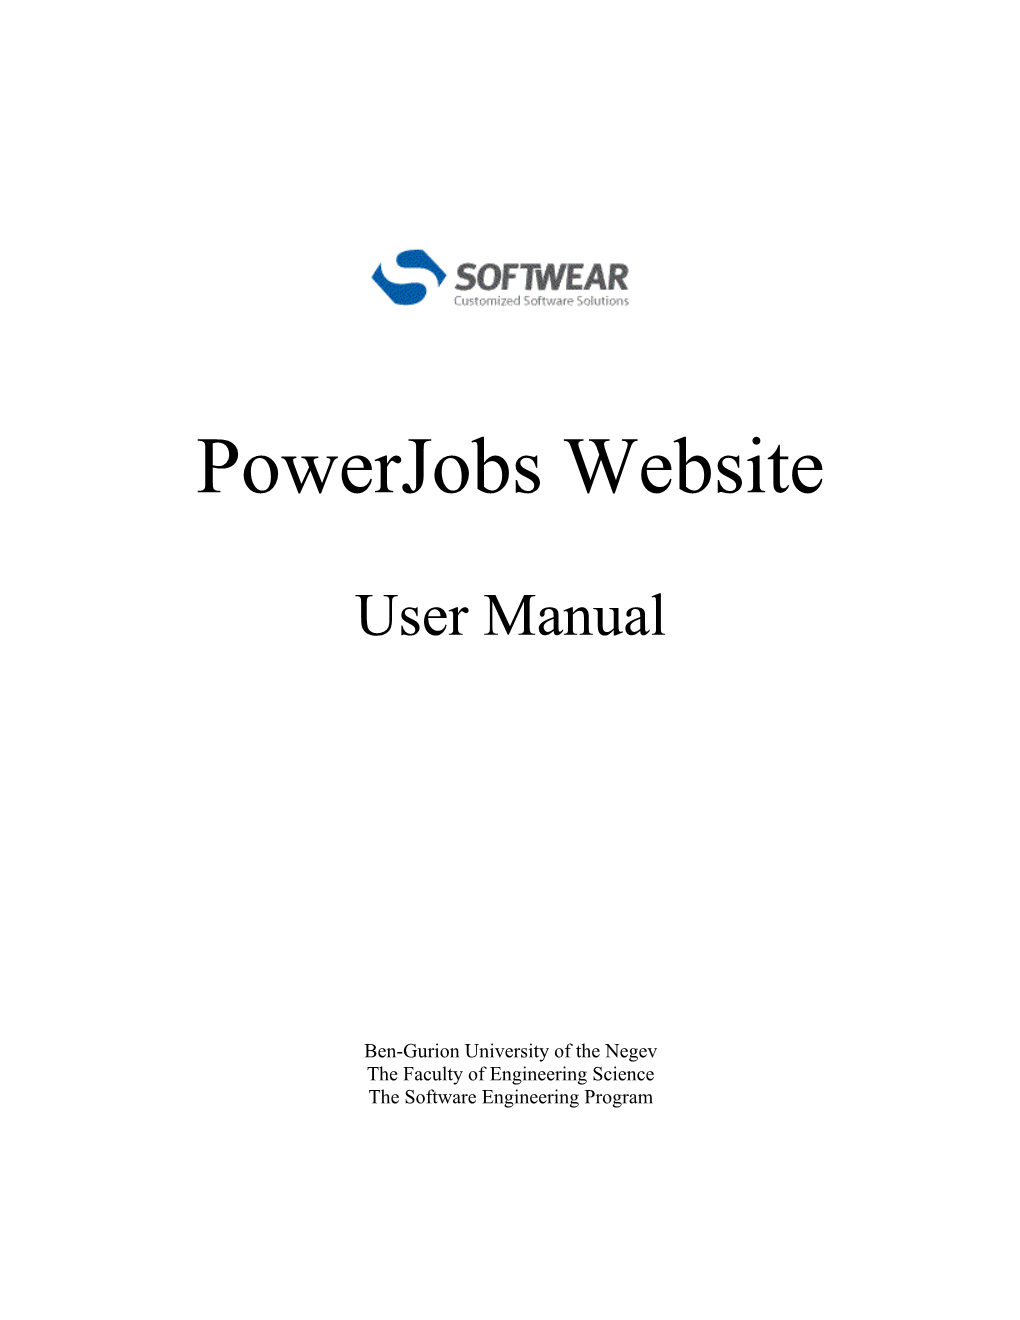 Powerjobs Website- Application Requirements Document